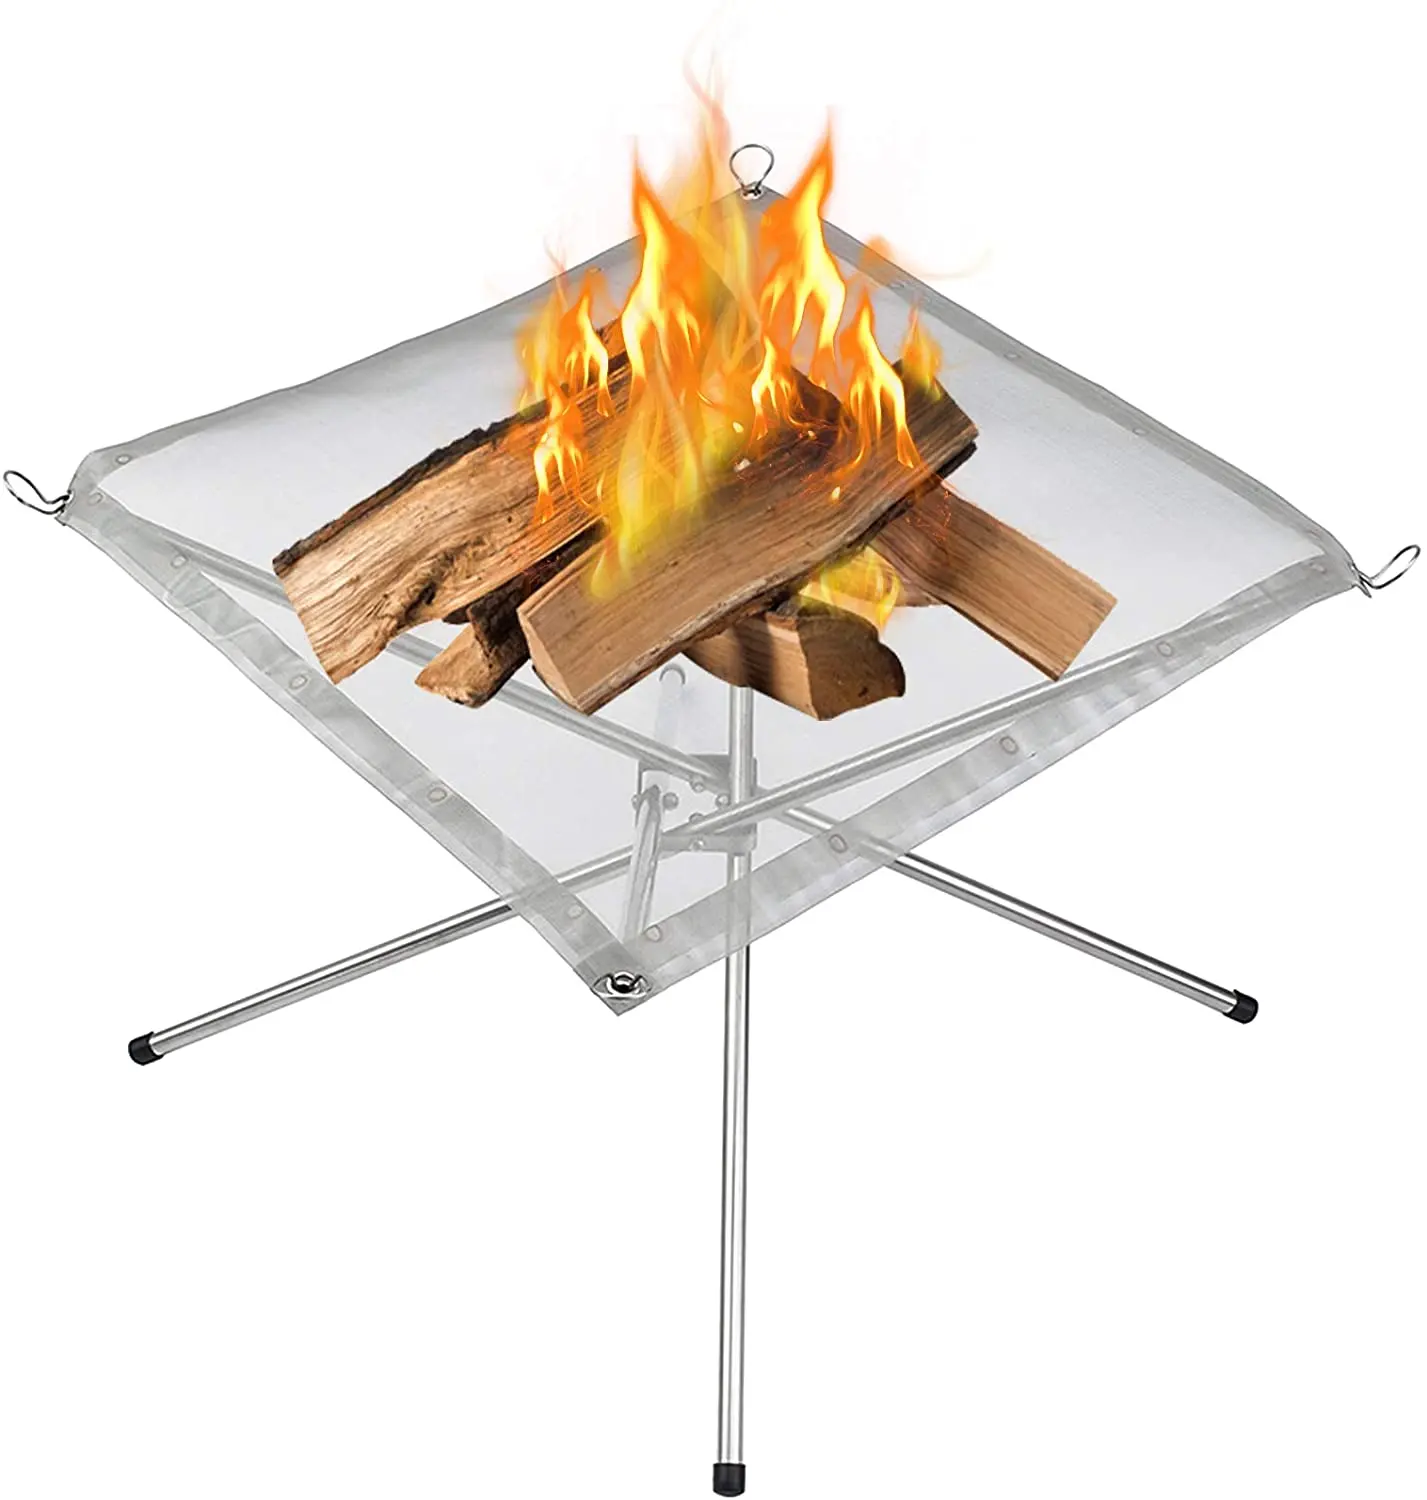 Patio Backyard Camping Portable Folding Fire Pit Outdoor Classic Wood Burning Steel Fire Bowl with 3 Foldable Legs